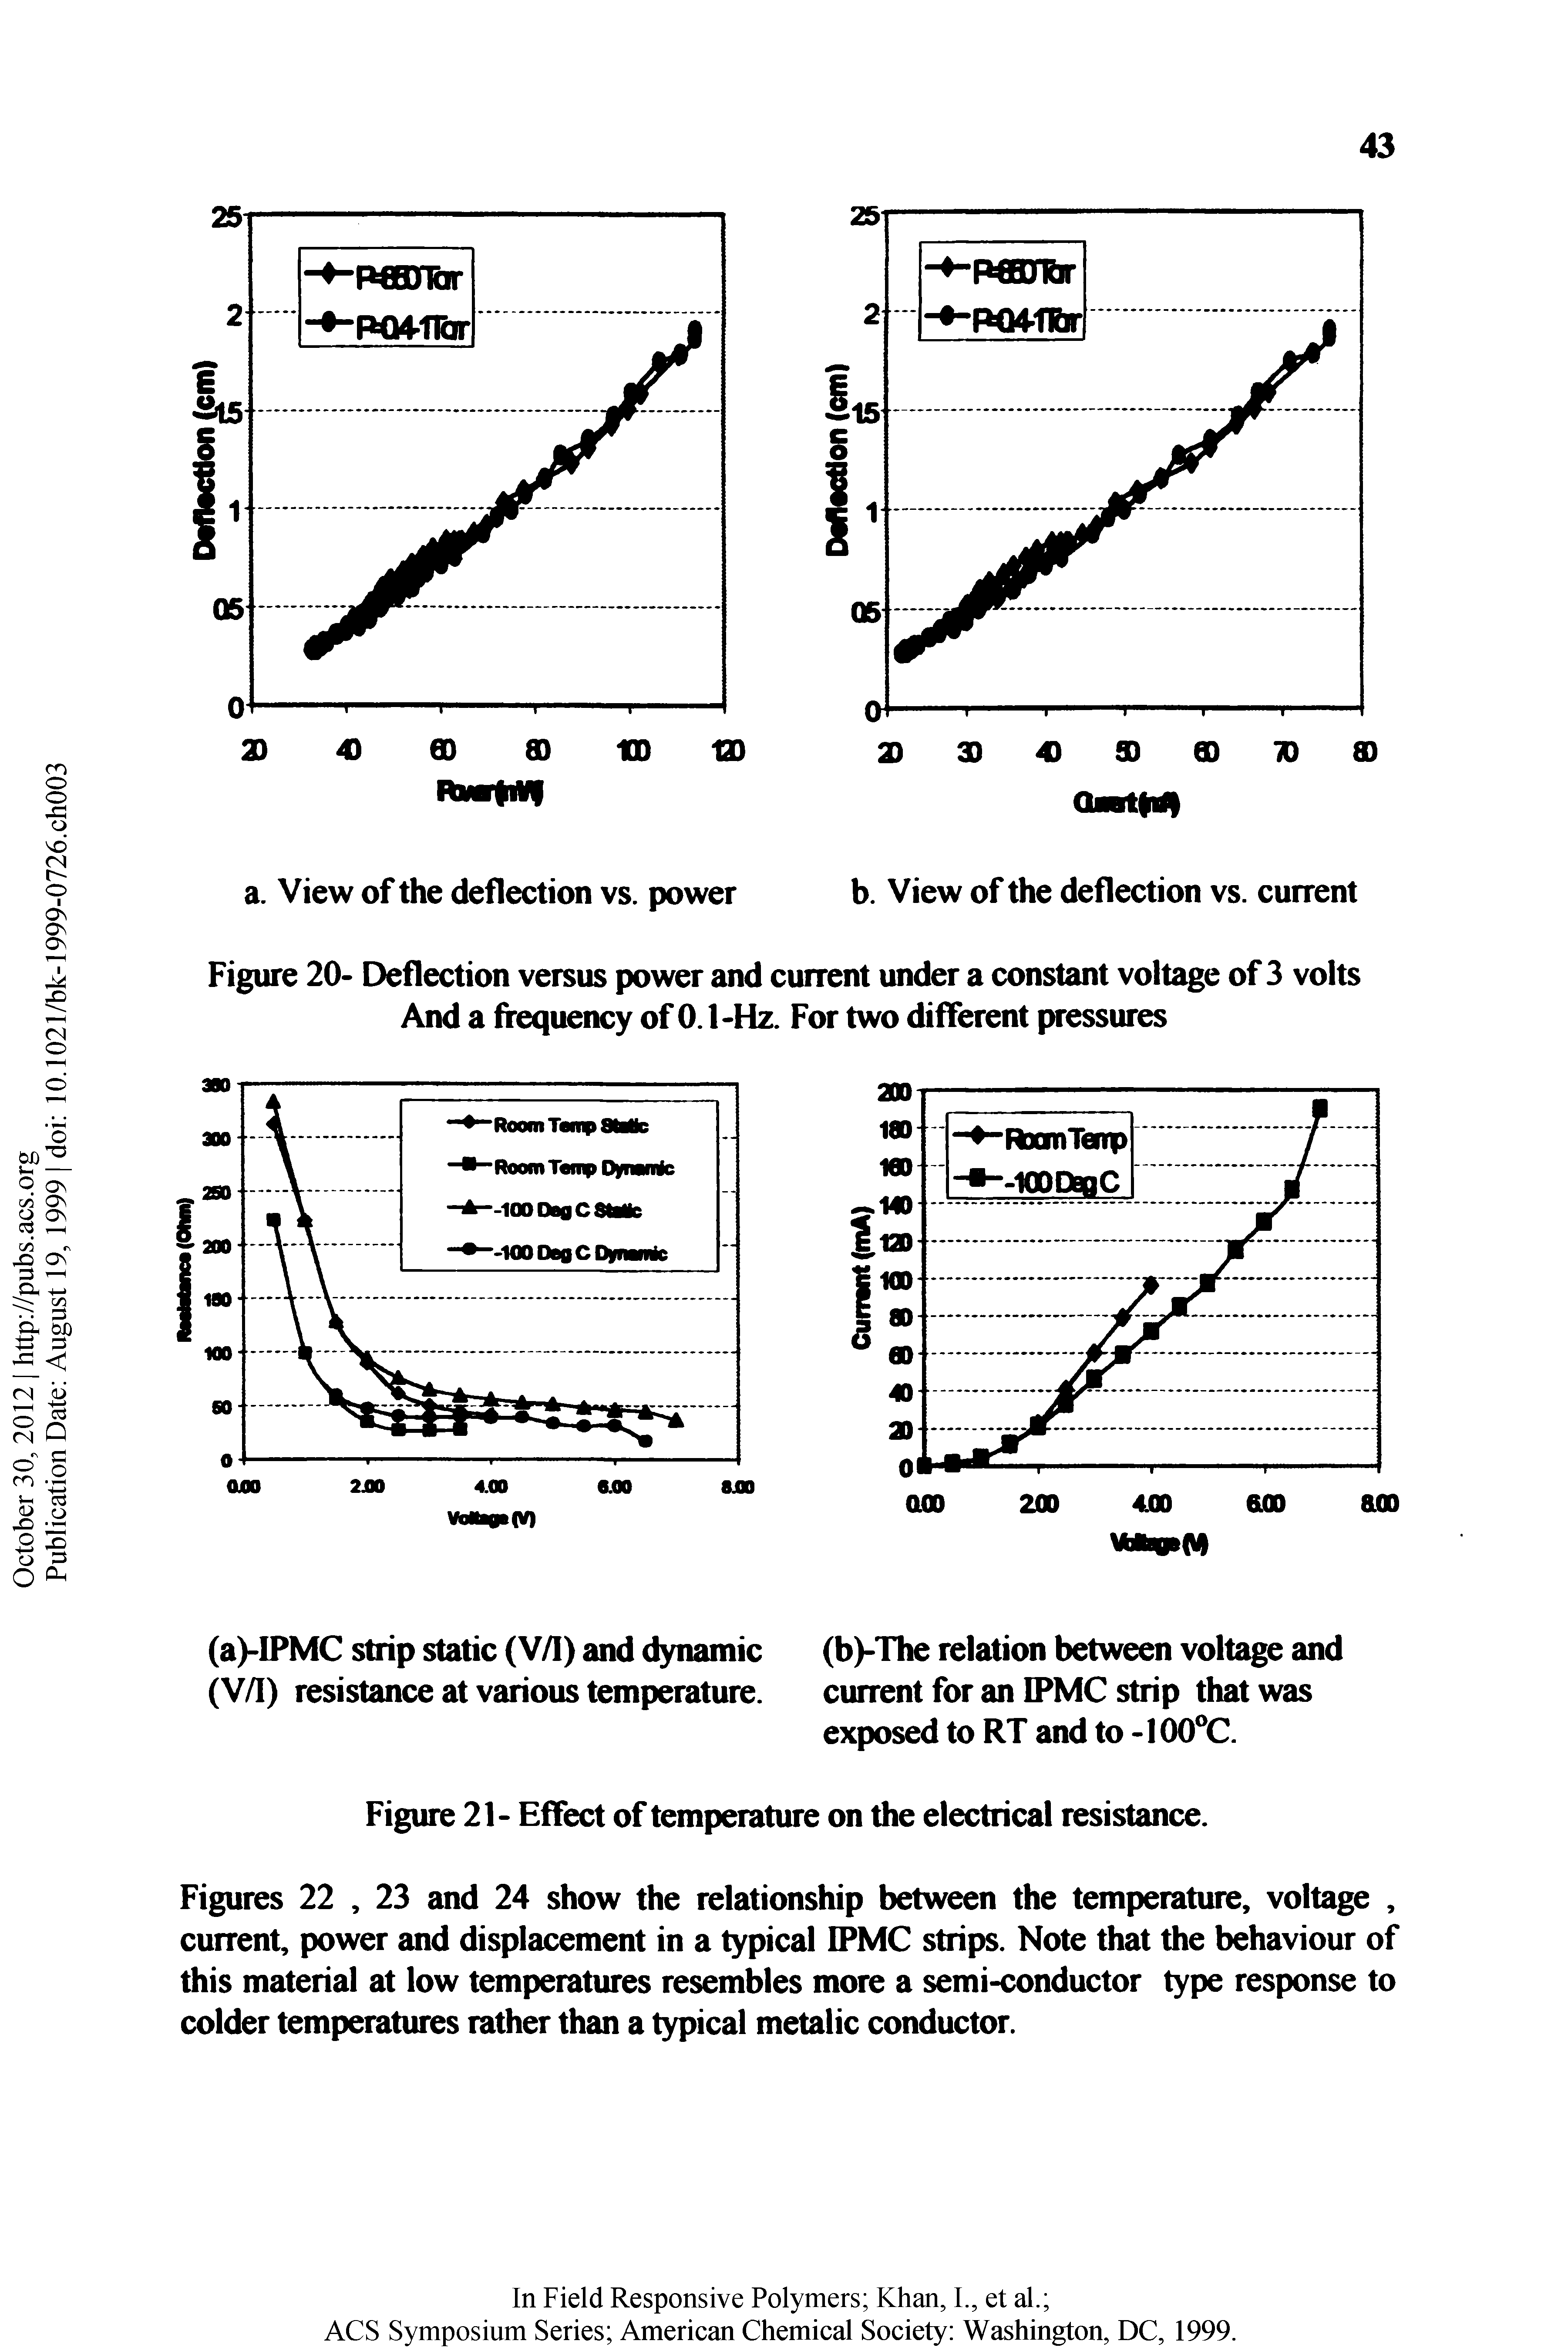 Figures 22, 23 and 24 show the relationship between the temperature, voltage, current, power and displacement in a typical IPMC strips. Note that the behaviour of this material at low temperatures resembles more a semi-conductor type response to colder temperatures rather than a typical metalic conductor.